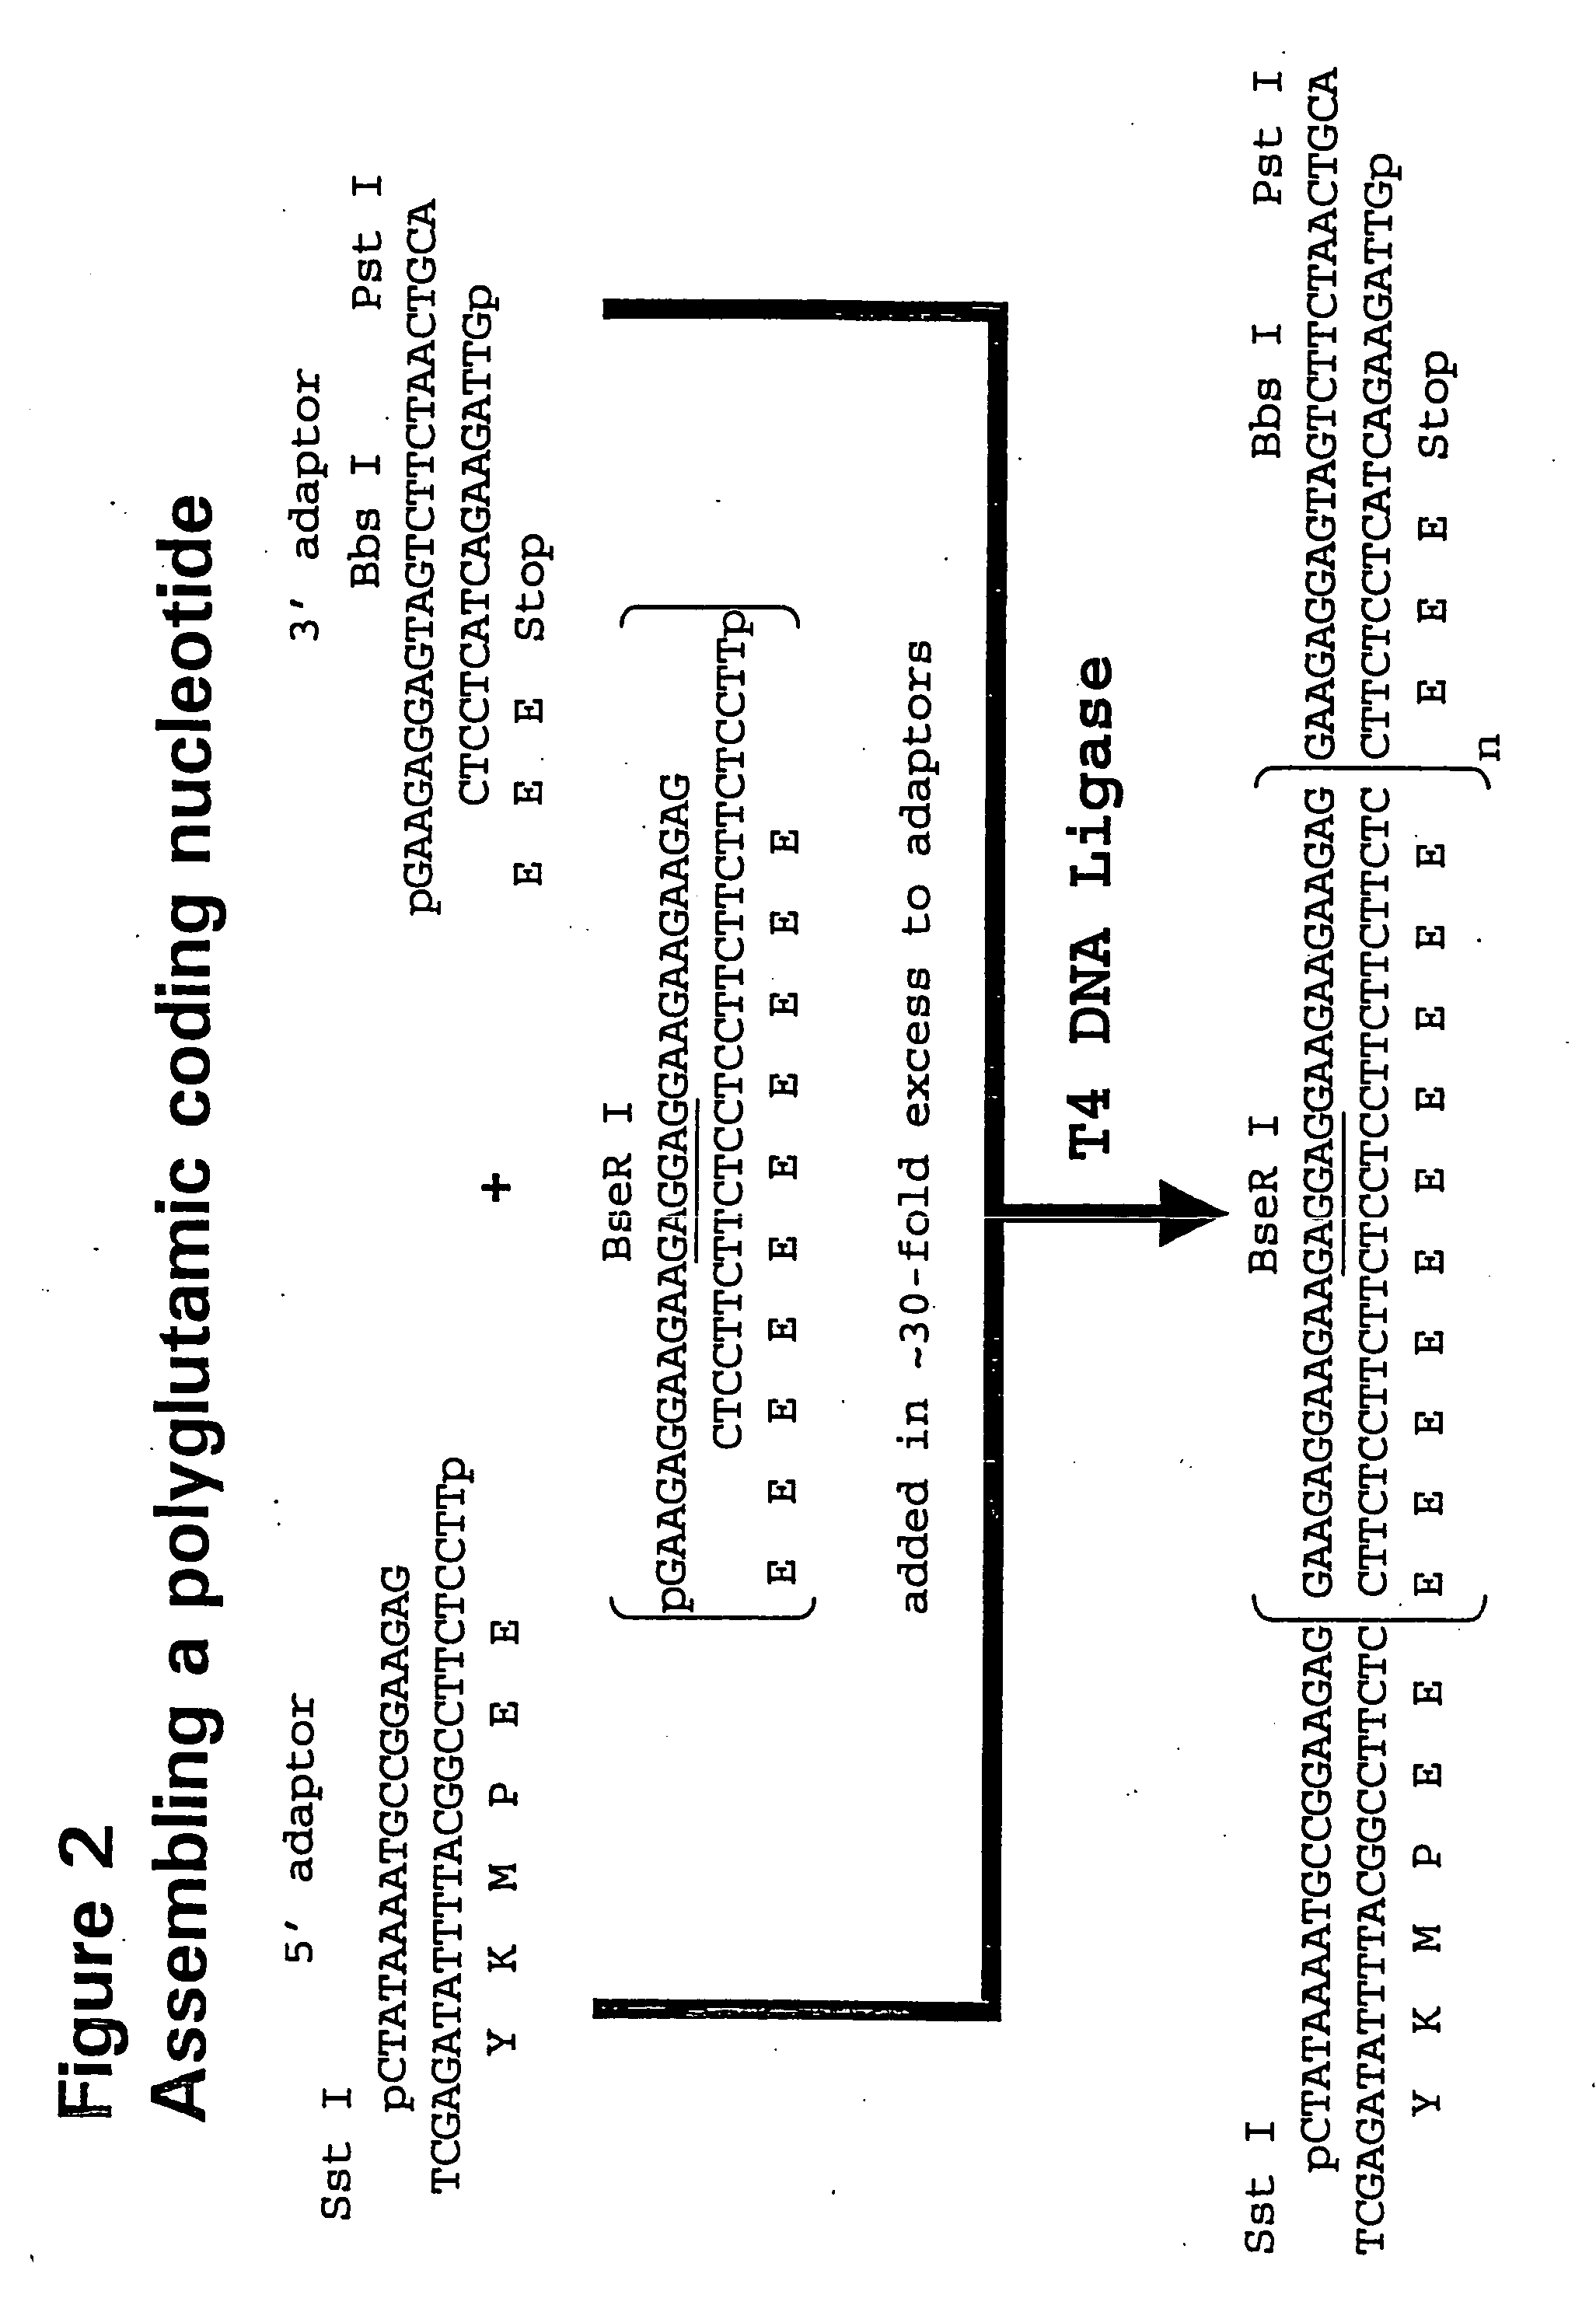 Recombinant production of polyanionic polymers, and uses thereof